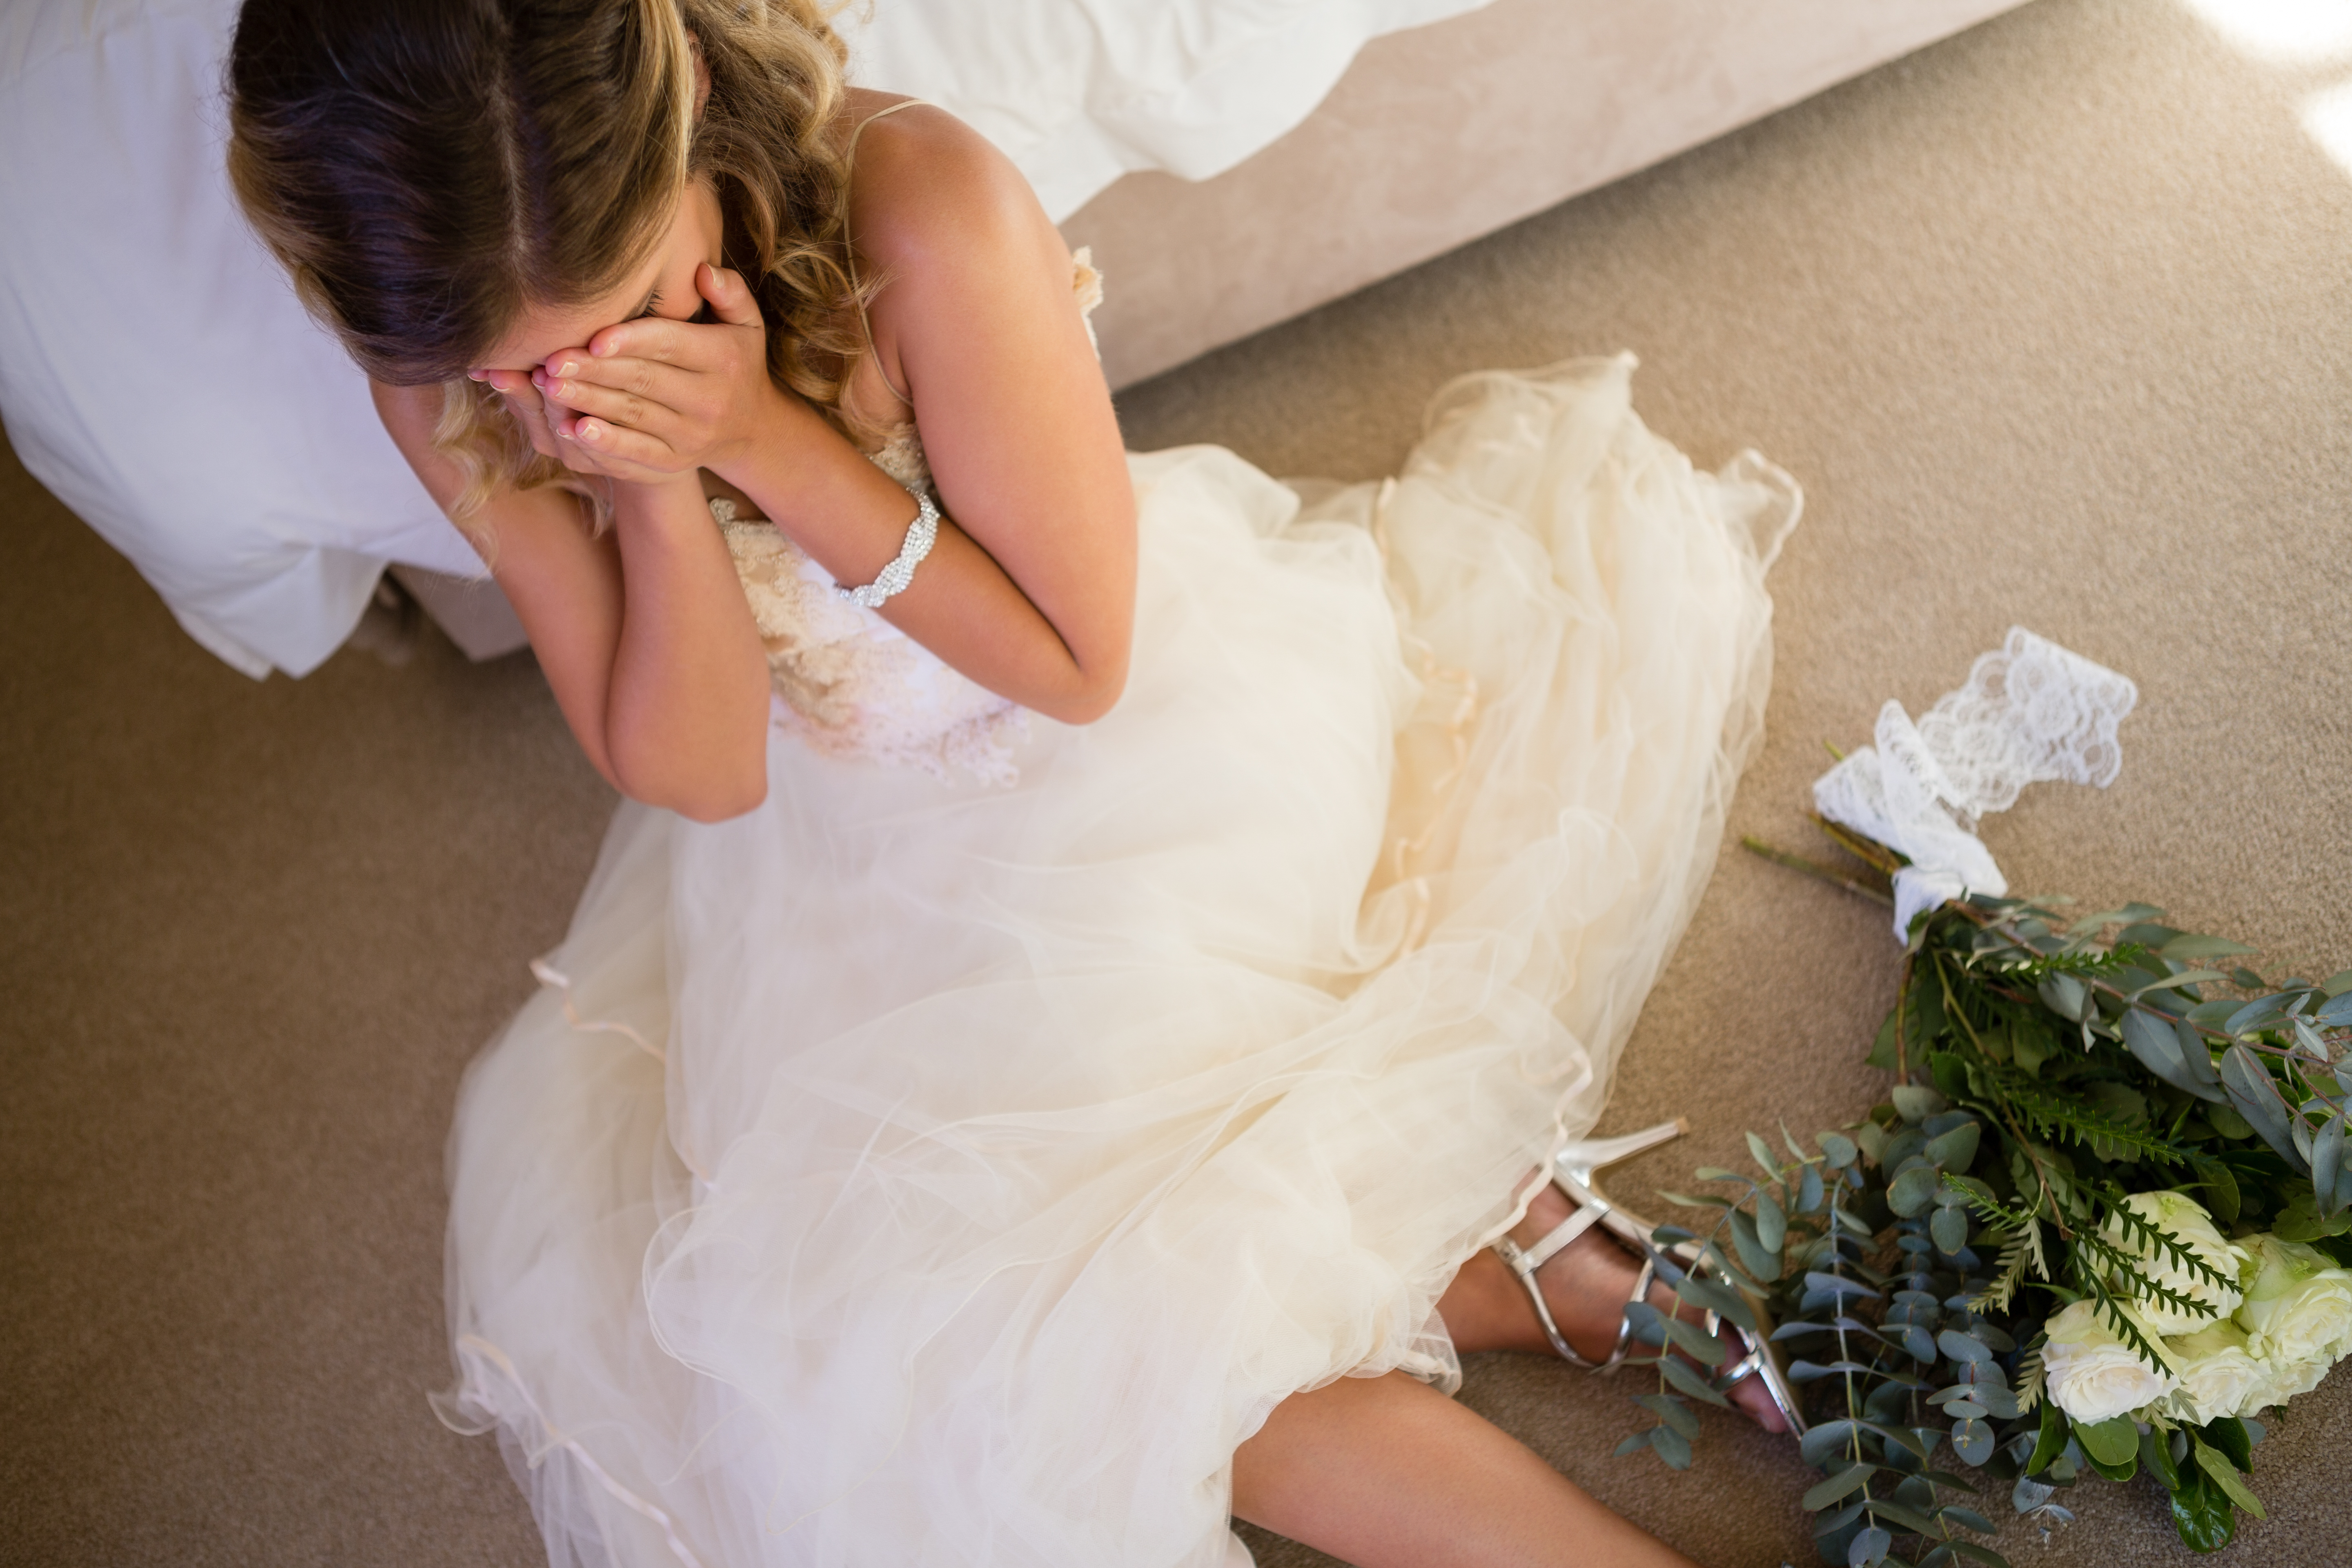 Bride sitting on the floor crying | Source: Shutterstock